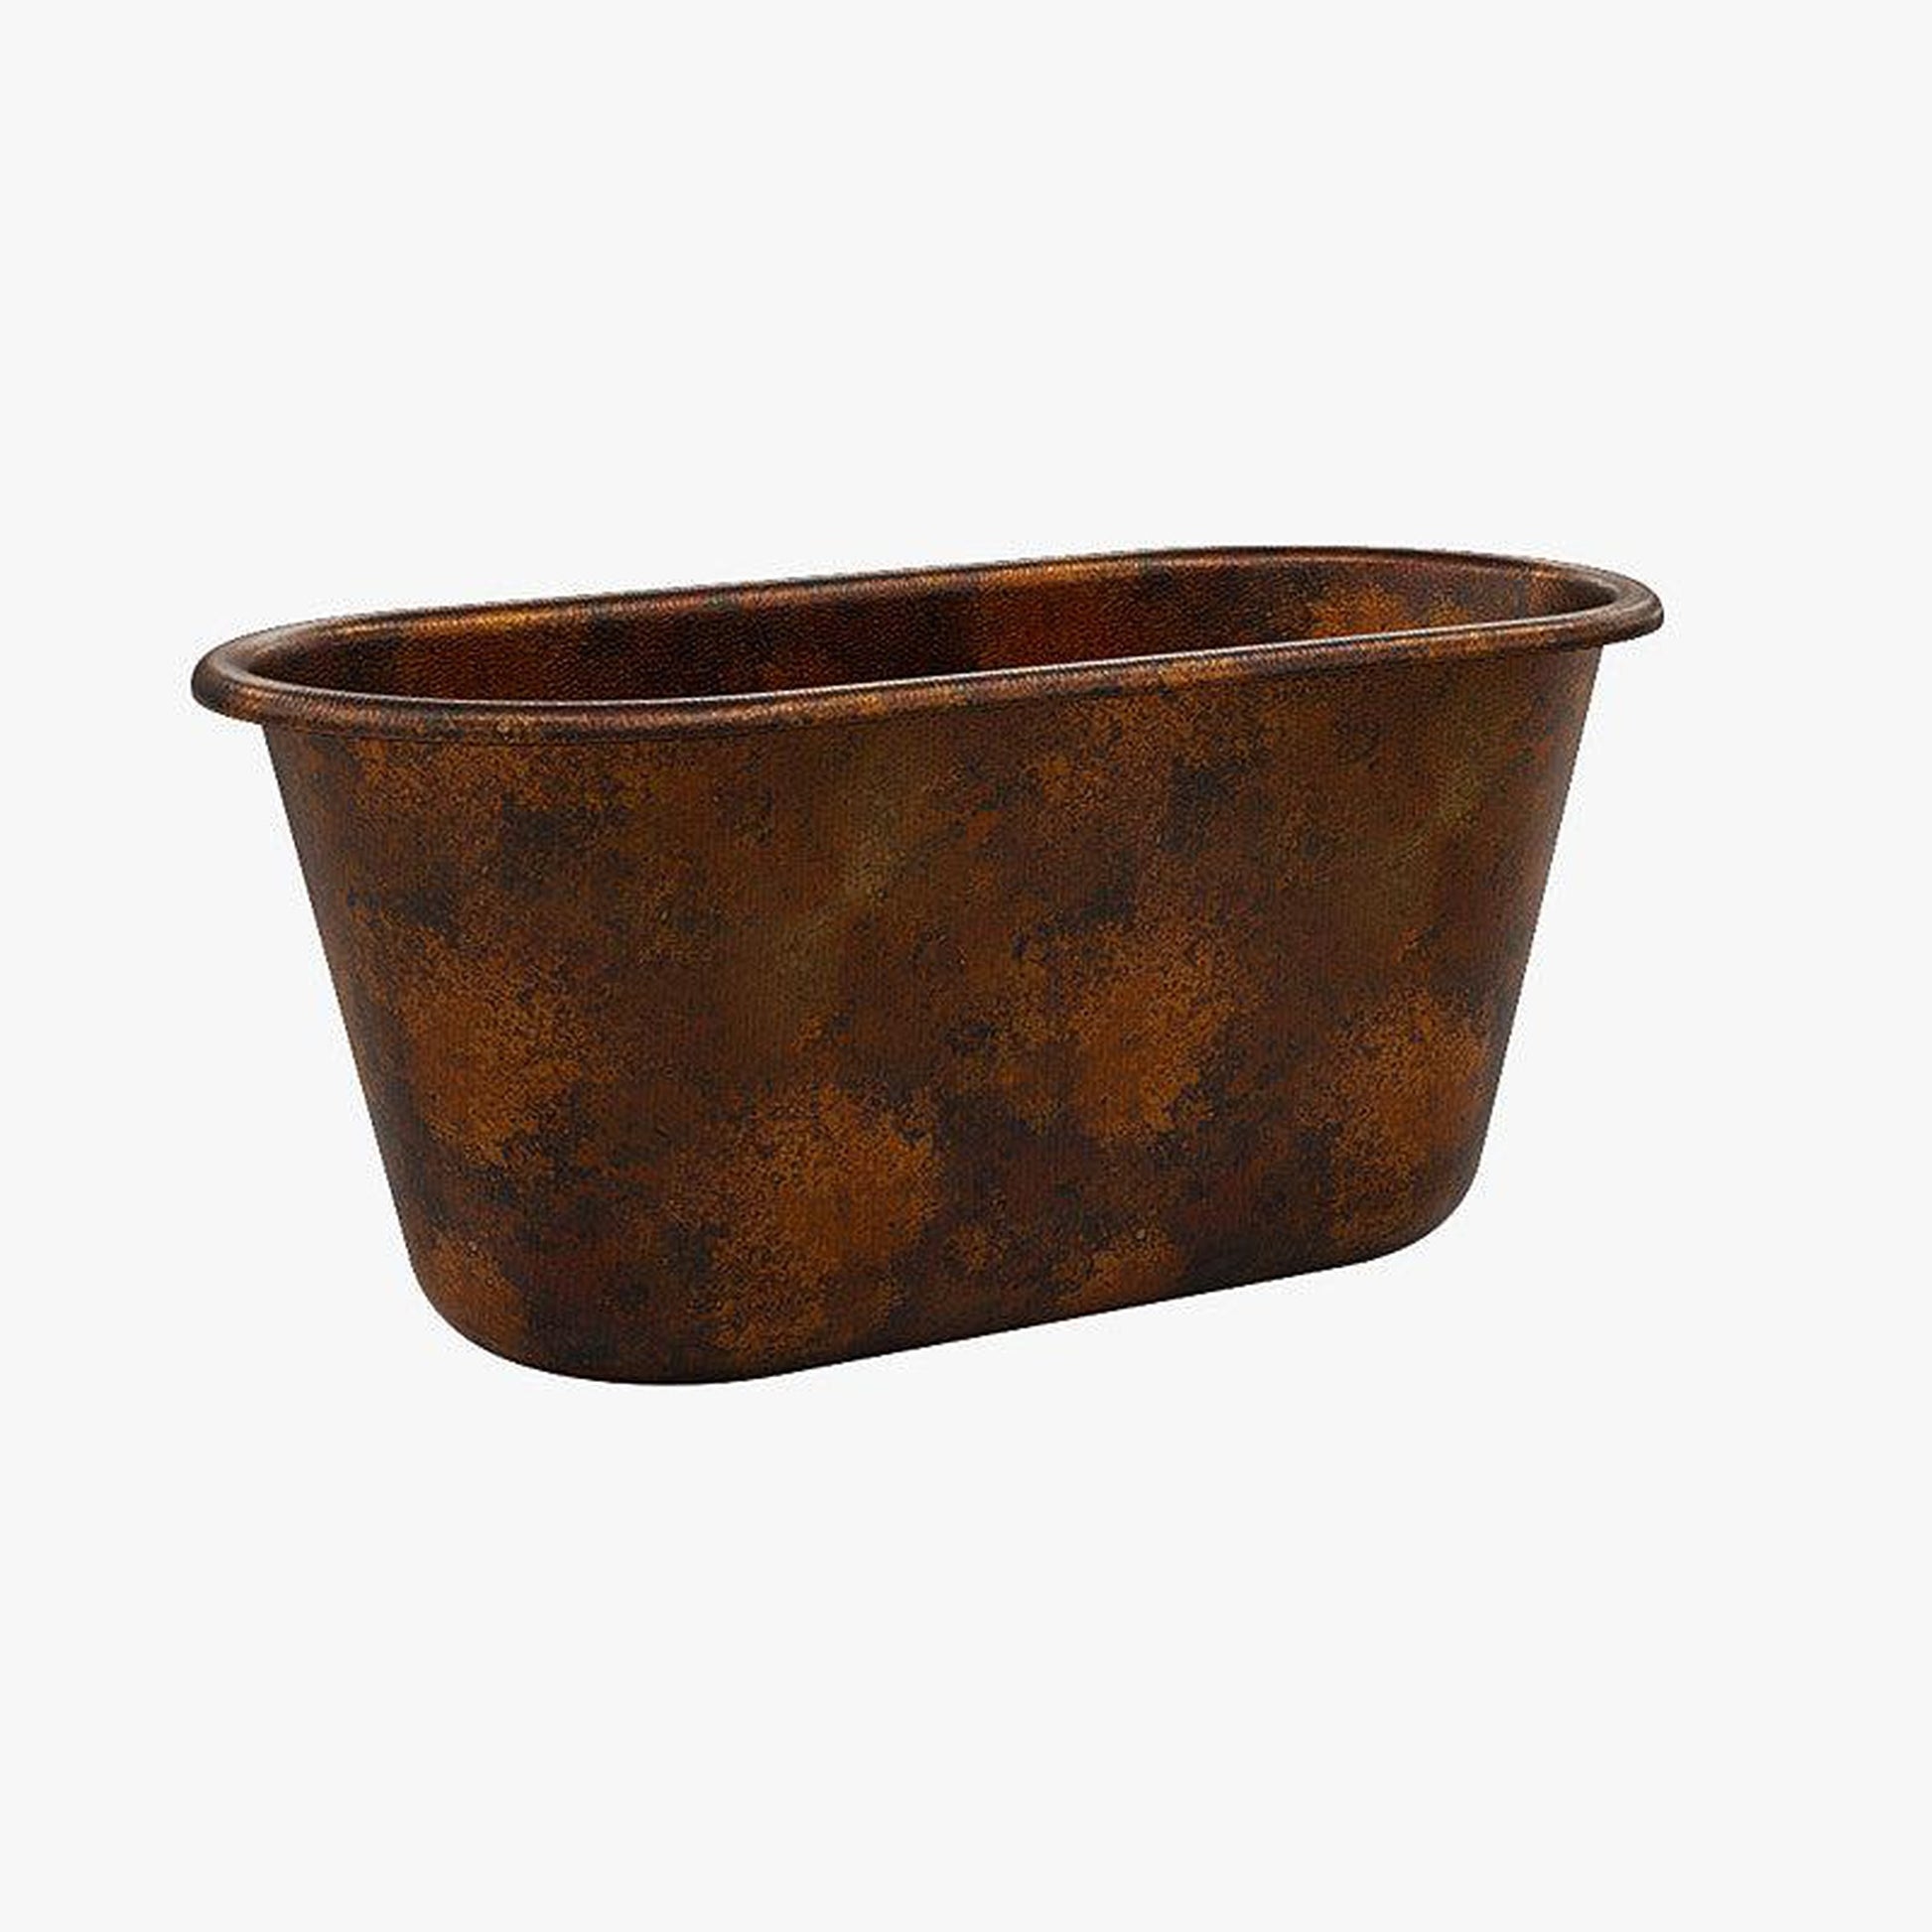 CopperSmith Heritage HX1 64" x 31" x 31" 14-Gauge Fire Copper Freestanding Bathtub With Fire Copper Interior and Polished Brass Push Button Tub Drain